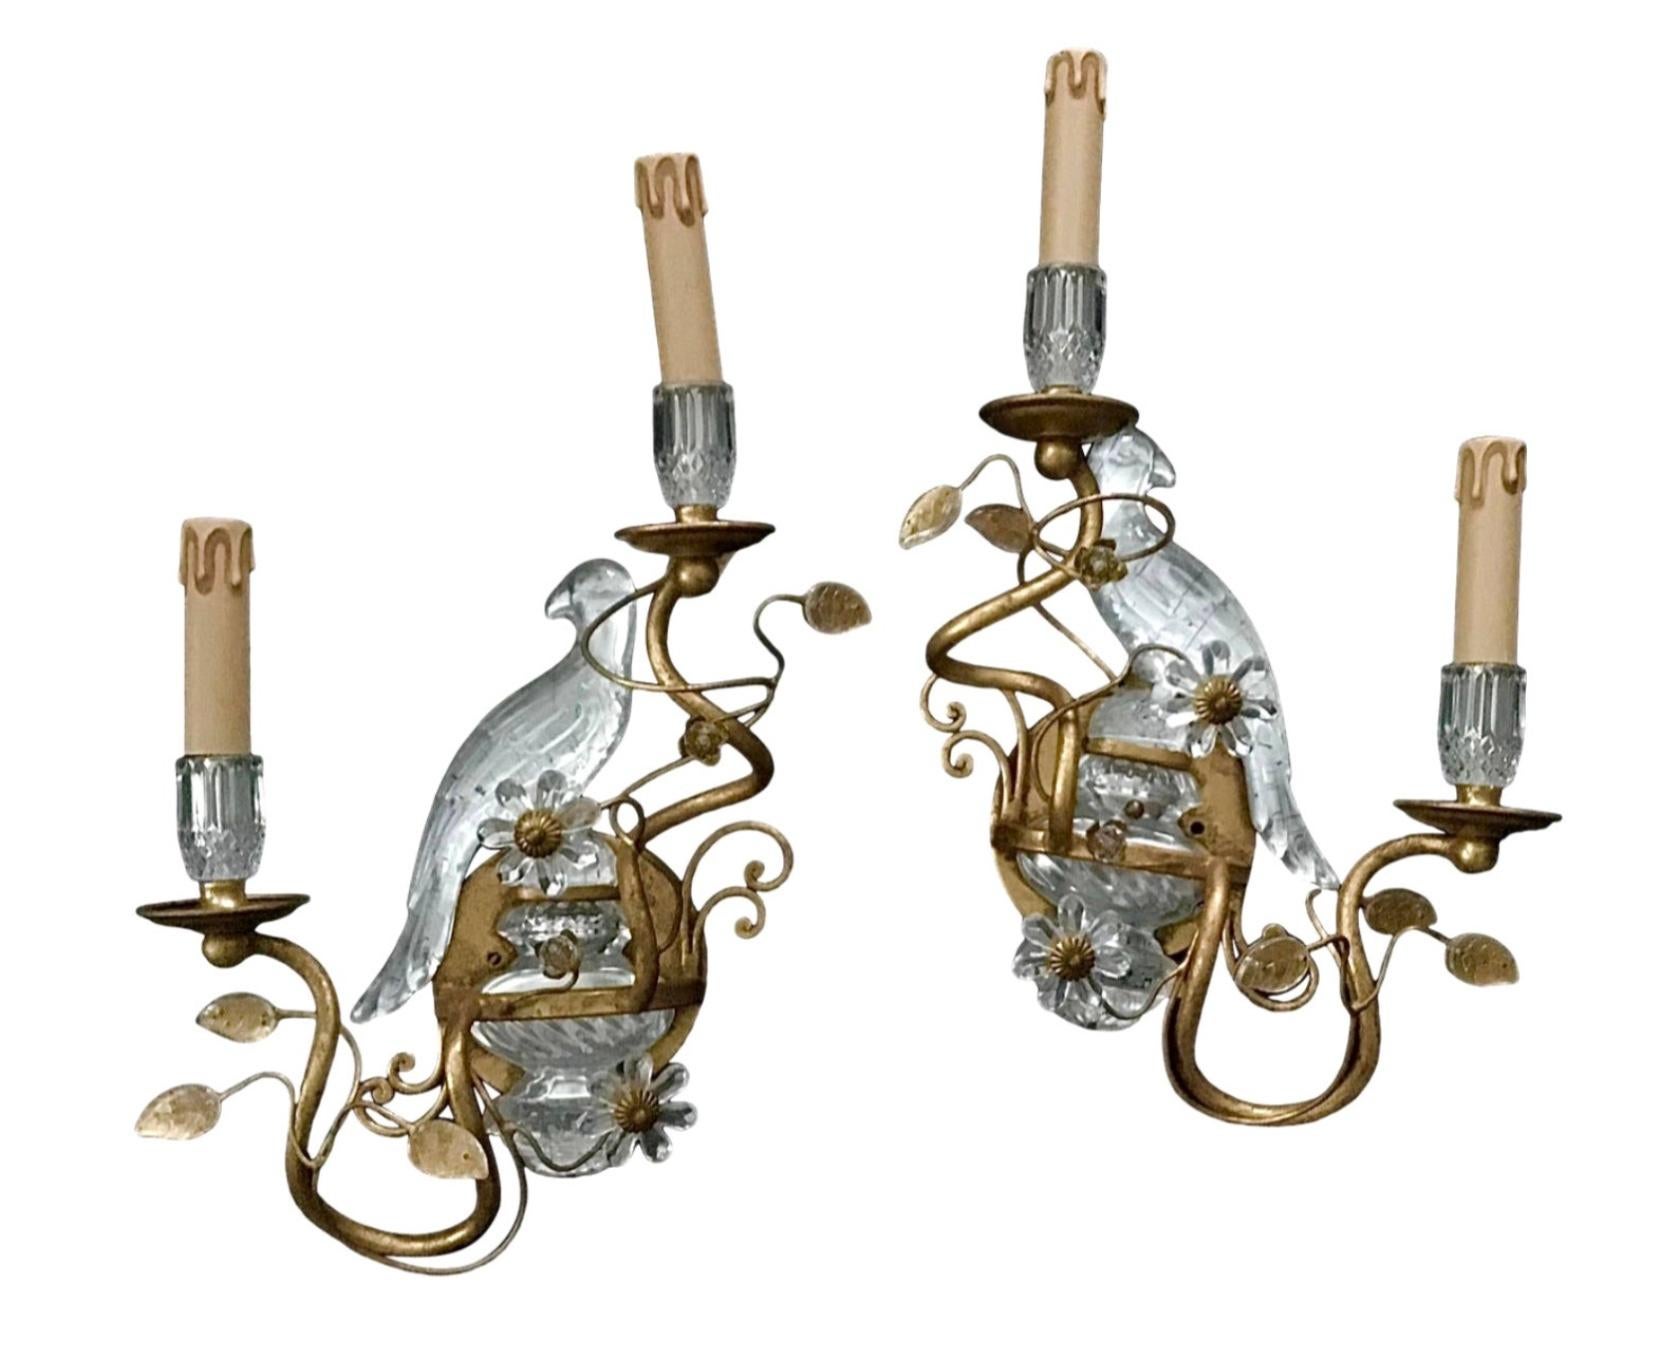 Beautiful French Maison Bagues style electrified sconces with characteristic Parrot Design. This is a pair of gilt and crystal sconces depicting reverse facing birds.
Height overall 19